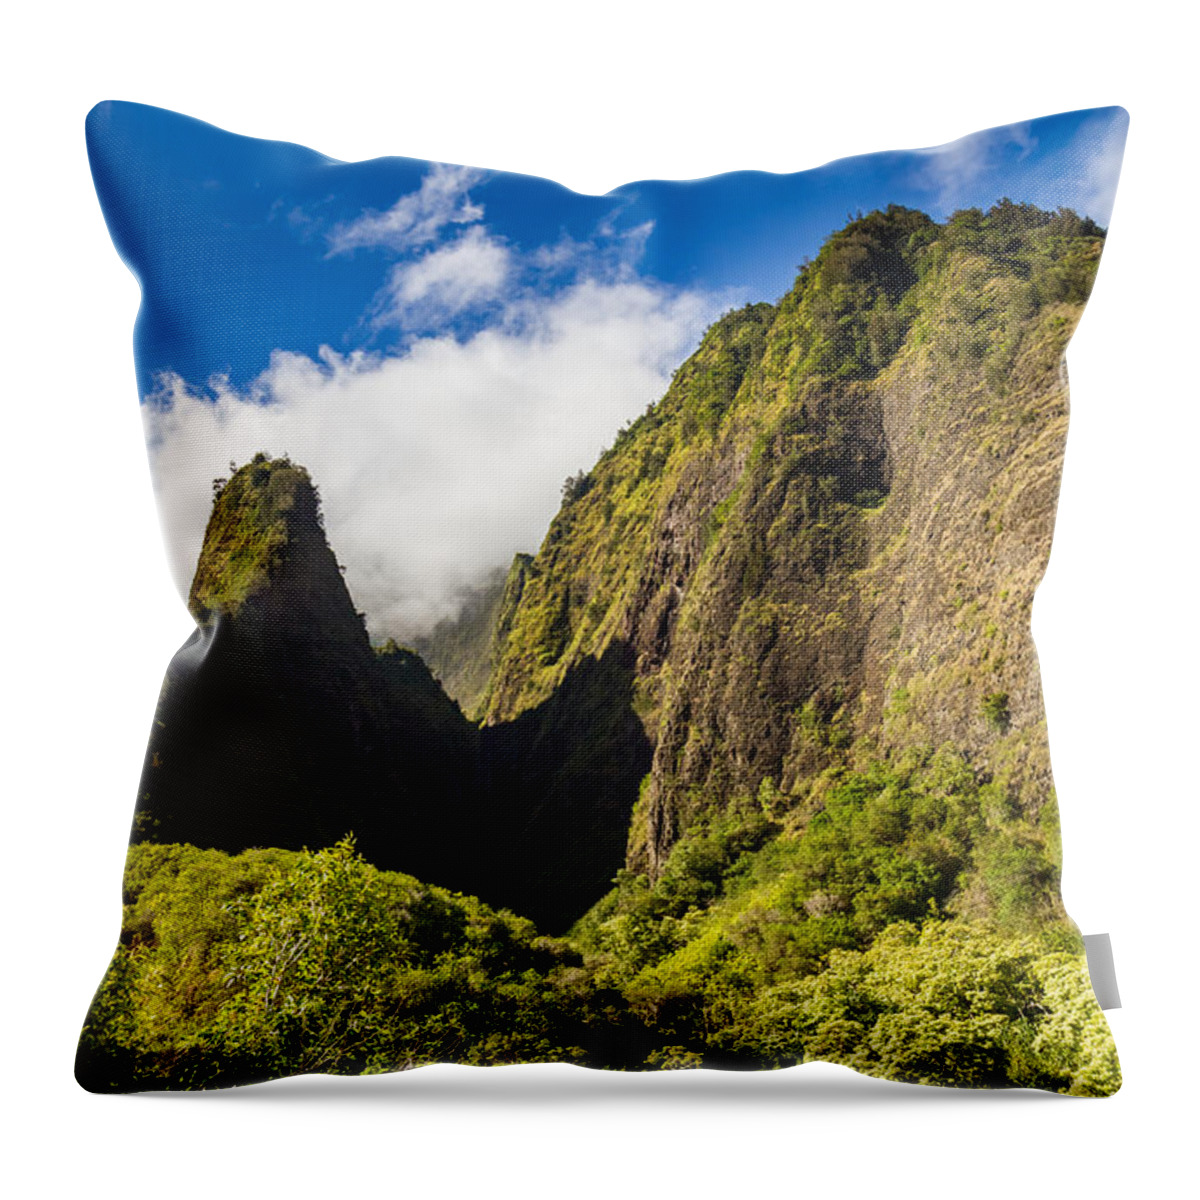 Maui Throw Pillow featuring the photograph Lush Iao Needle Maui by Pierre Leclerc Photography